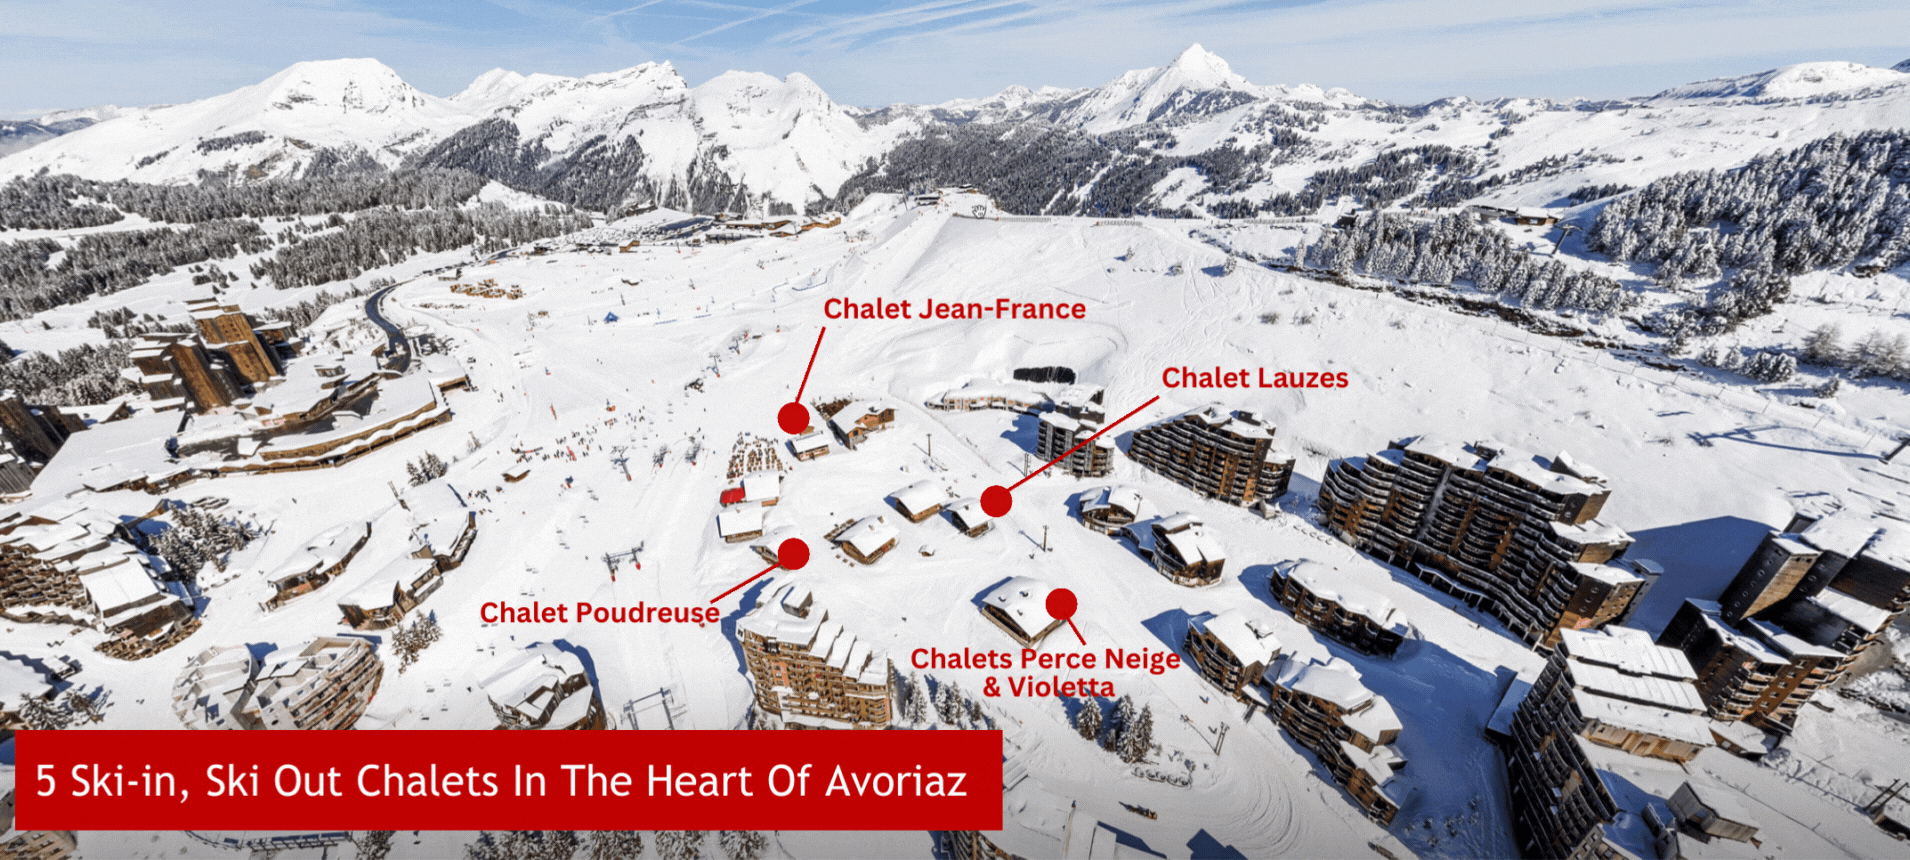 PRIVATE CHALET, accommodation chalets for your holidays in the French Alps  winter or summer season